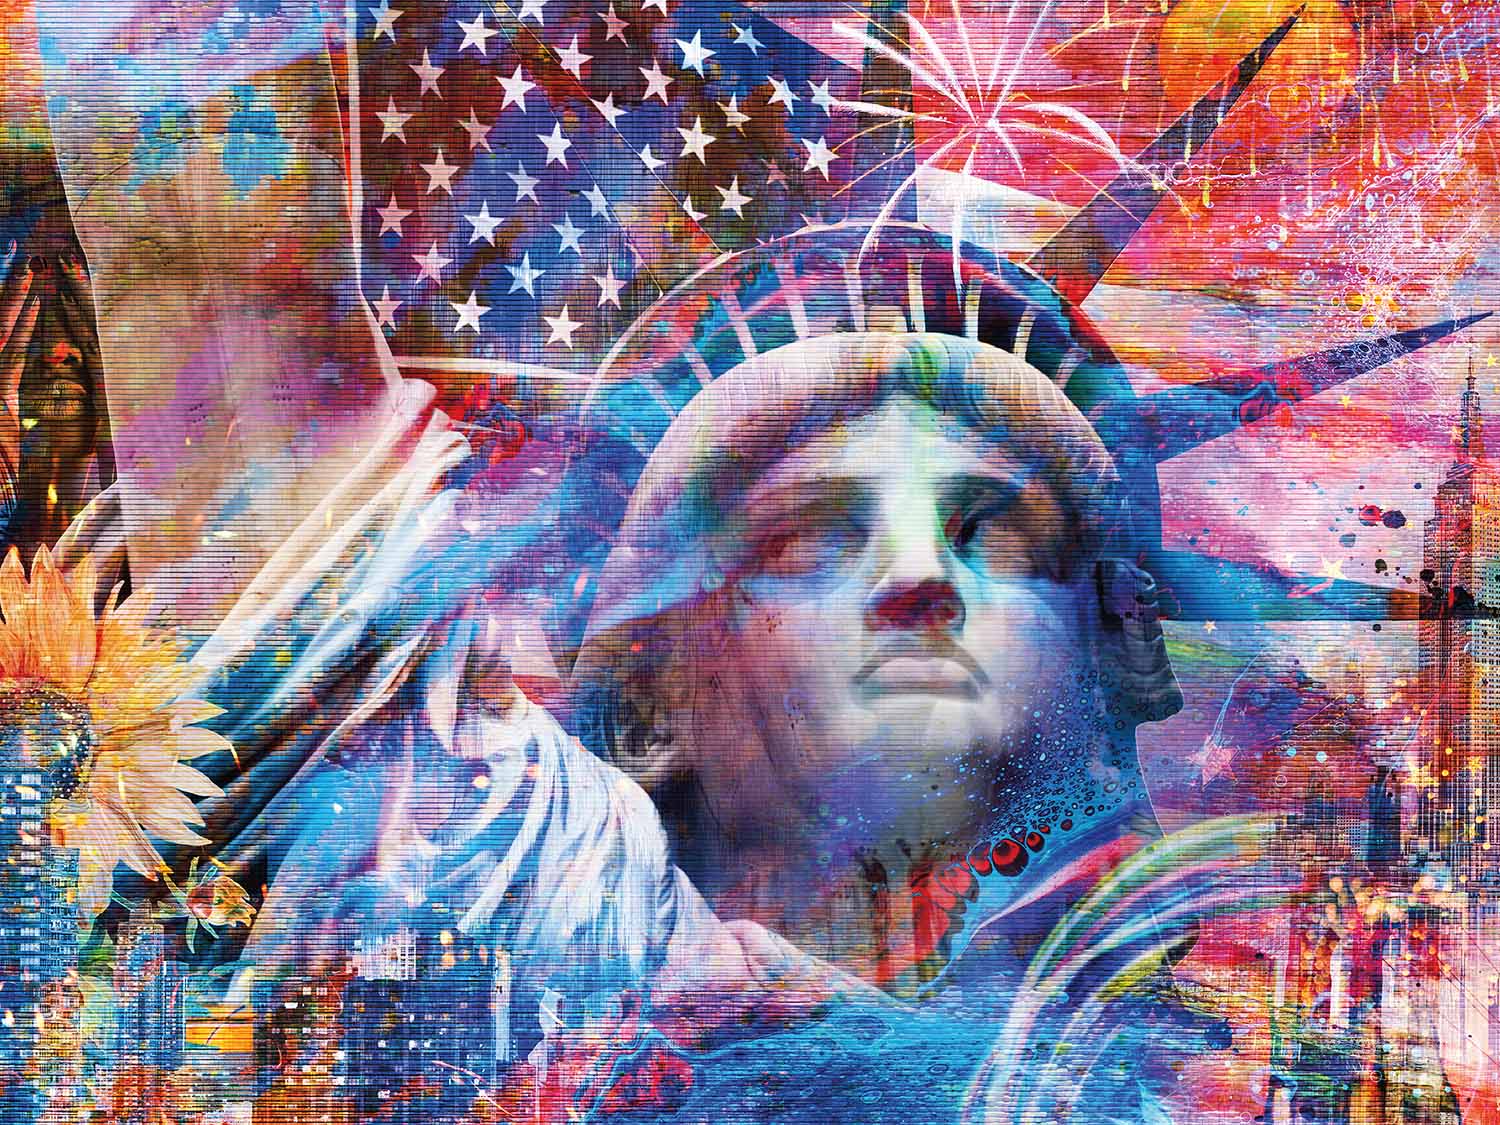 Land of the Free - Stars and Stripes Patriotic Jigsaw Puzzle